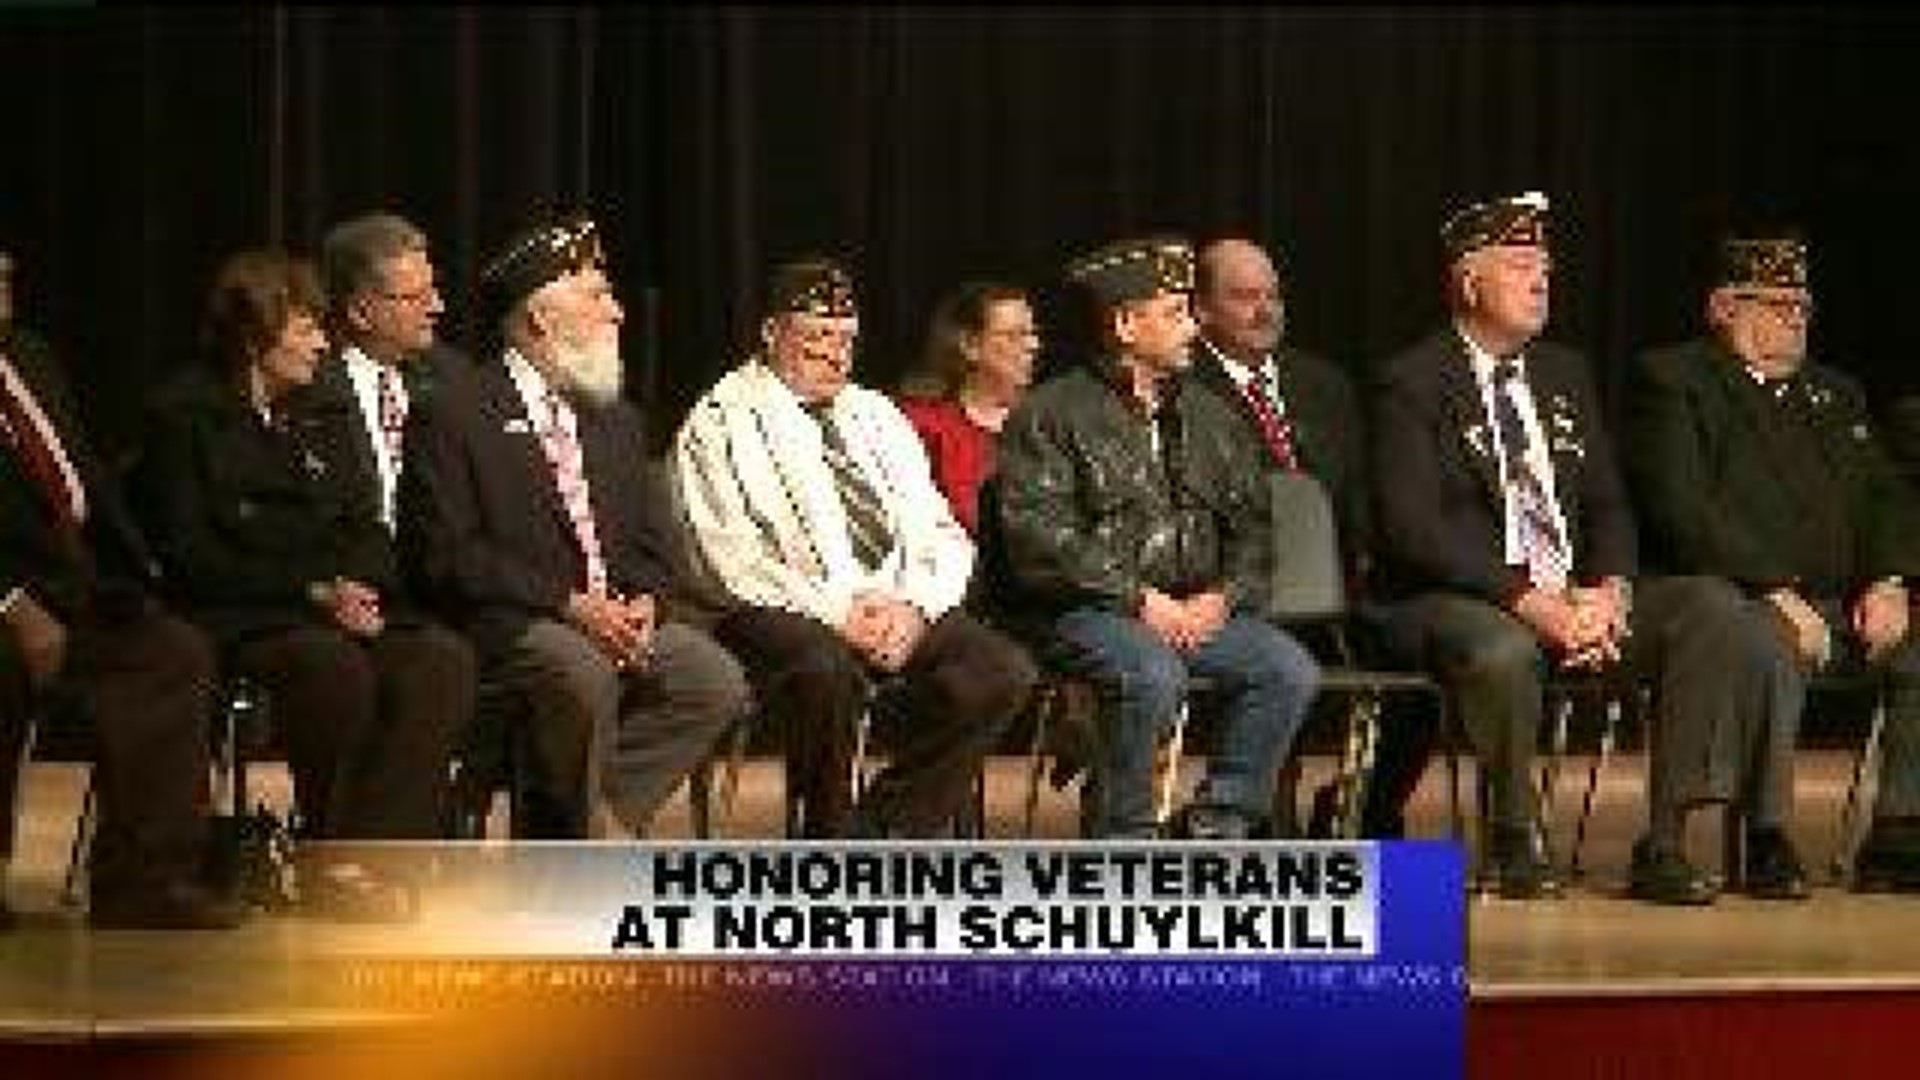 More than 70 Years Later, Diplomas For Vets in Schuylkill County